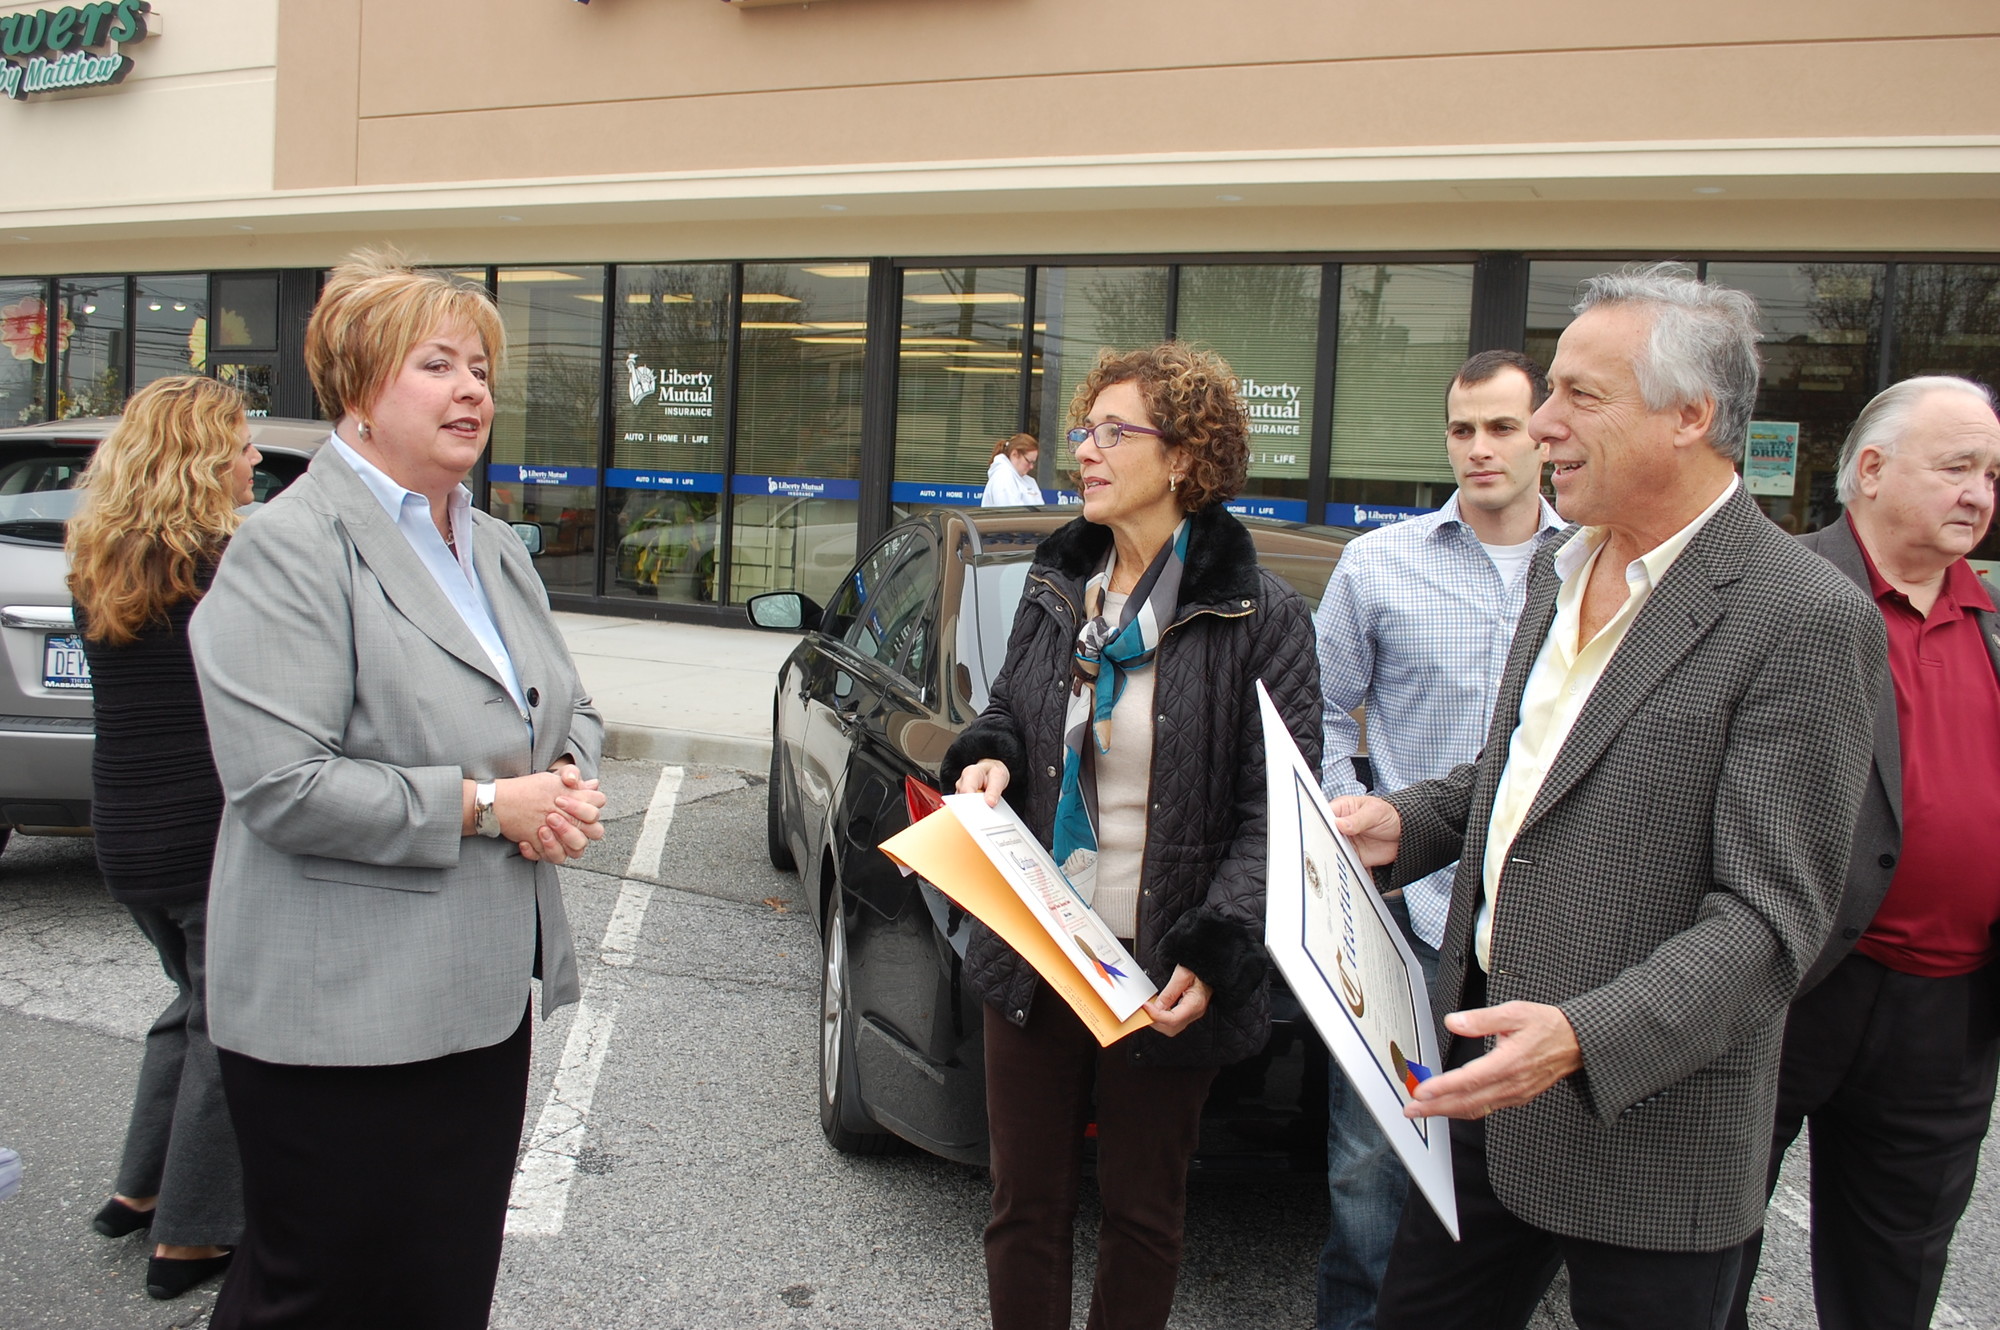 Hempstead Town Supervisor Kate Murray told Wantagh Woods owners Lisa and Rob Gordon that the town would repave the parking lot at the refurbished shopping center.